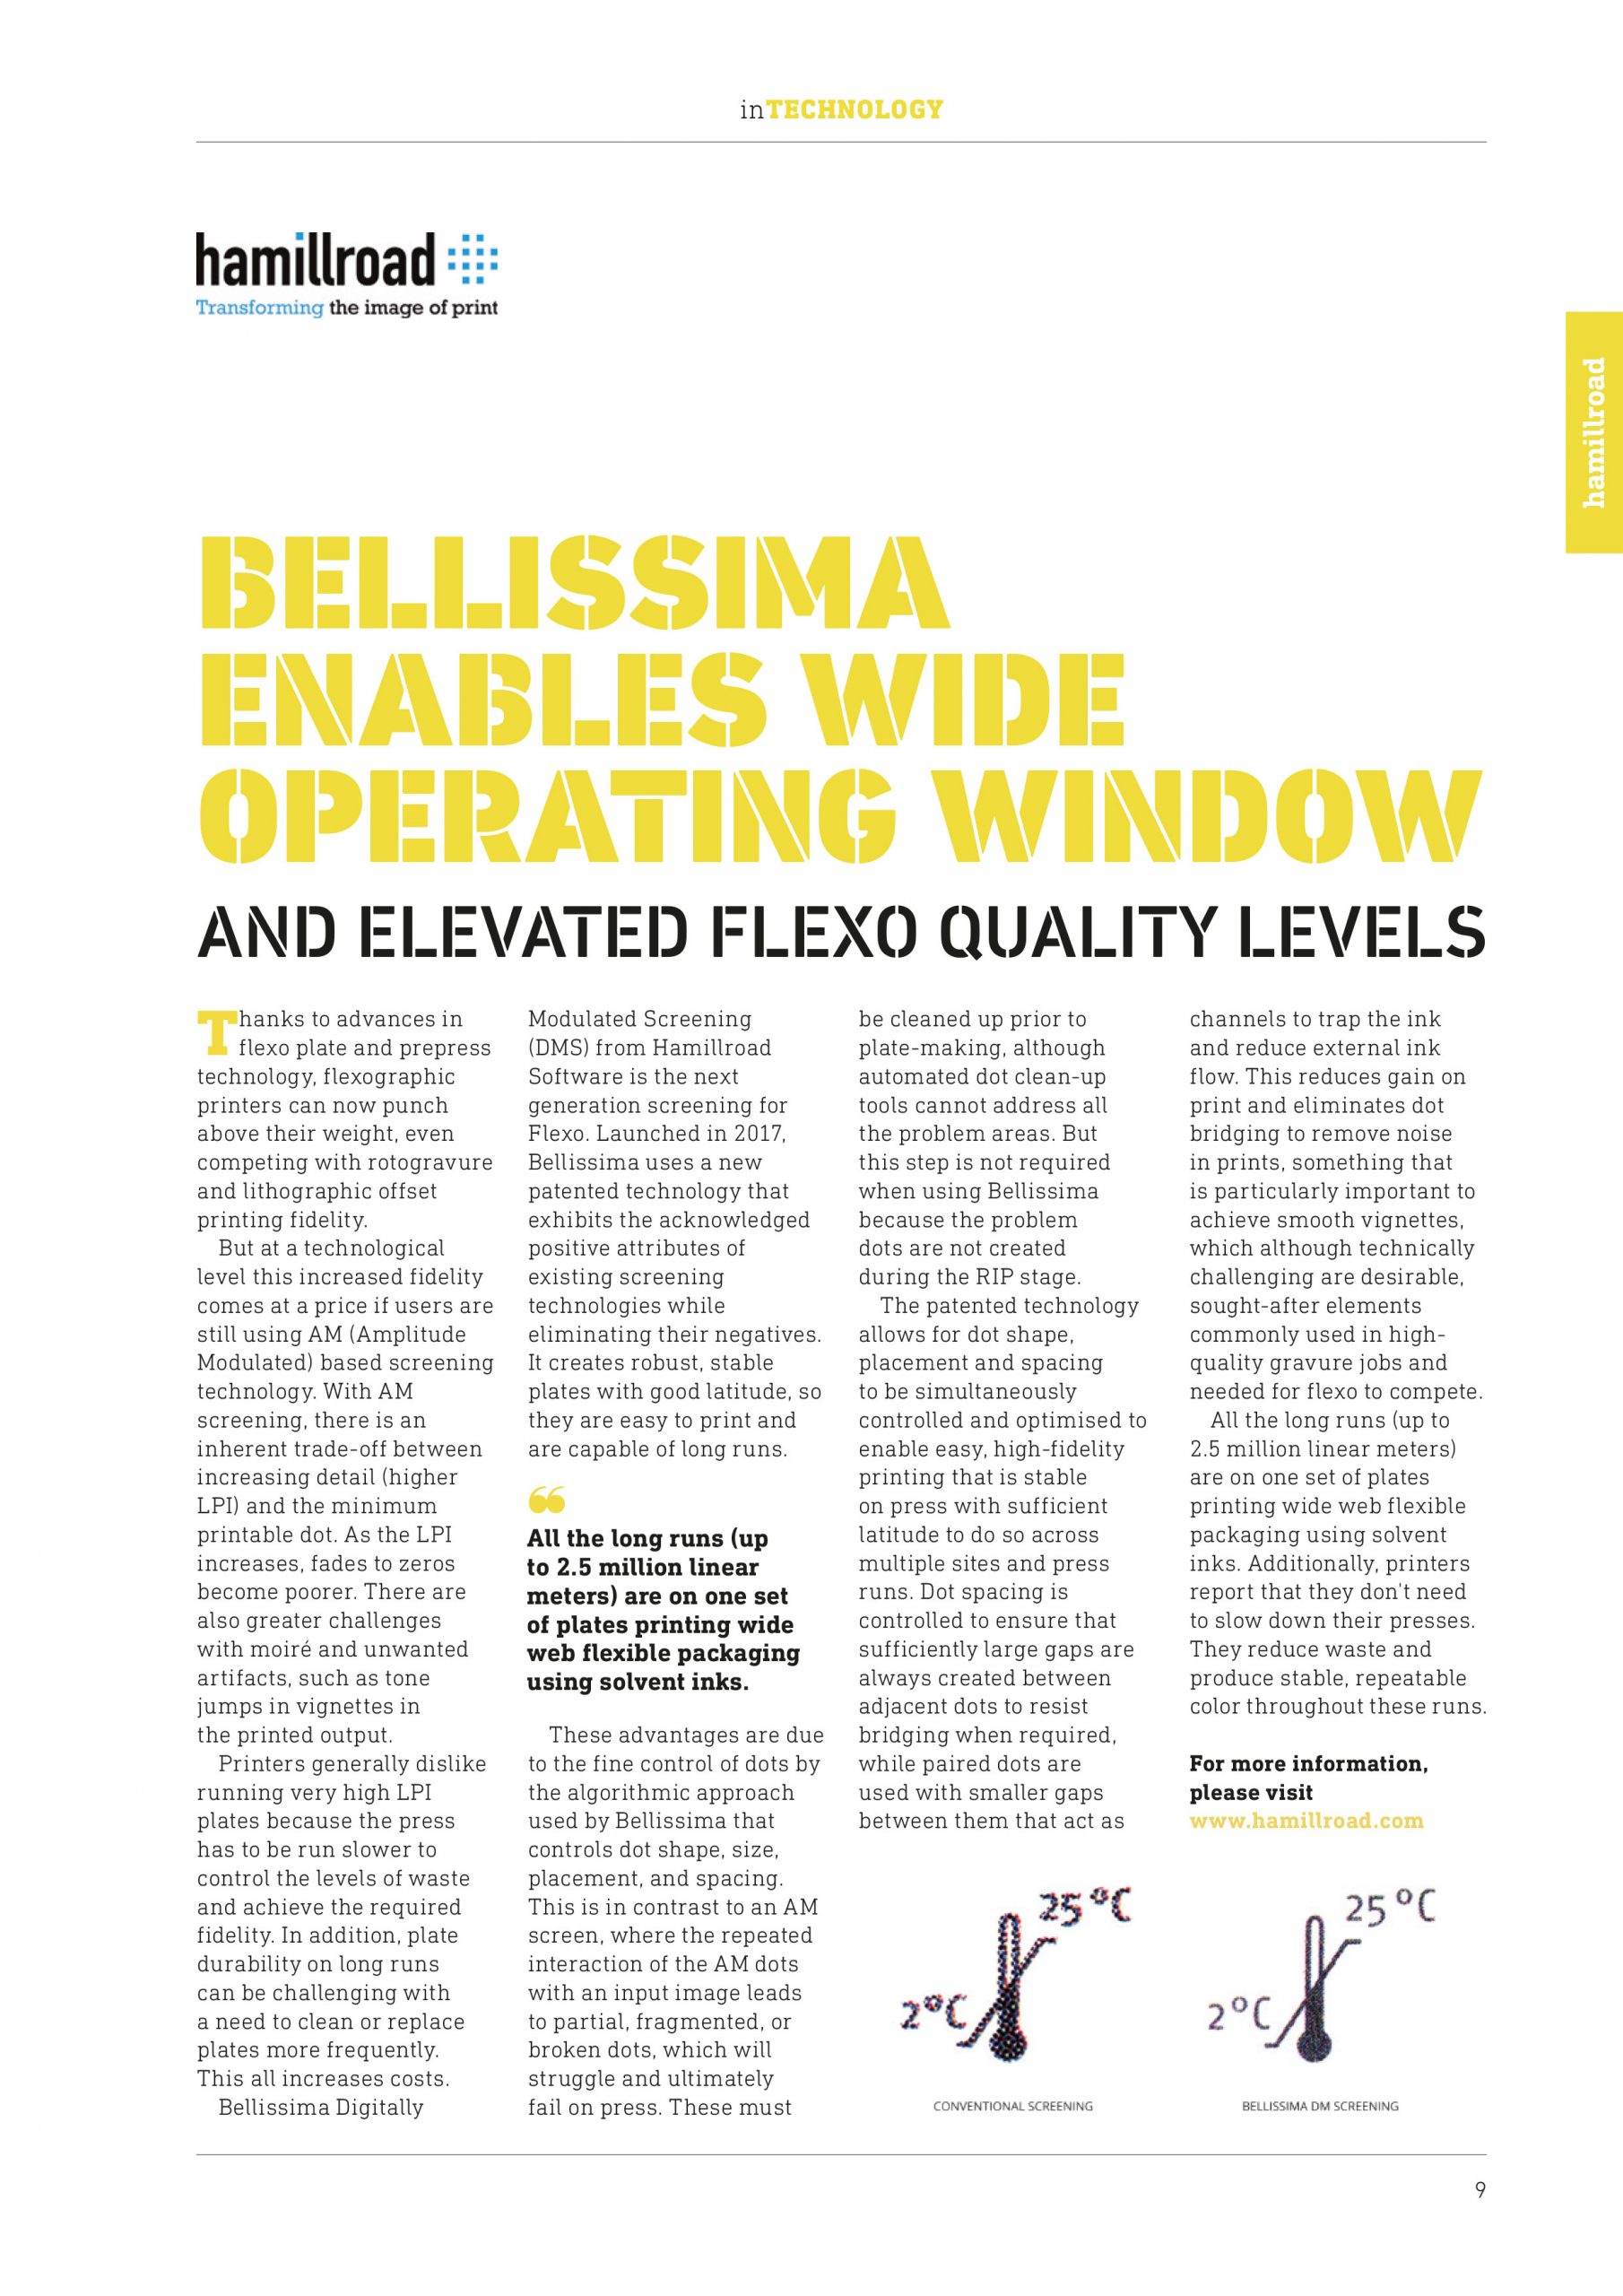 Bellissima enables wide operating window and elevated flexo quality levels